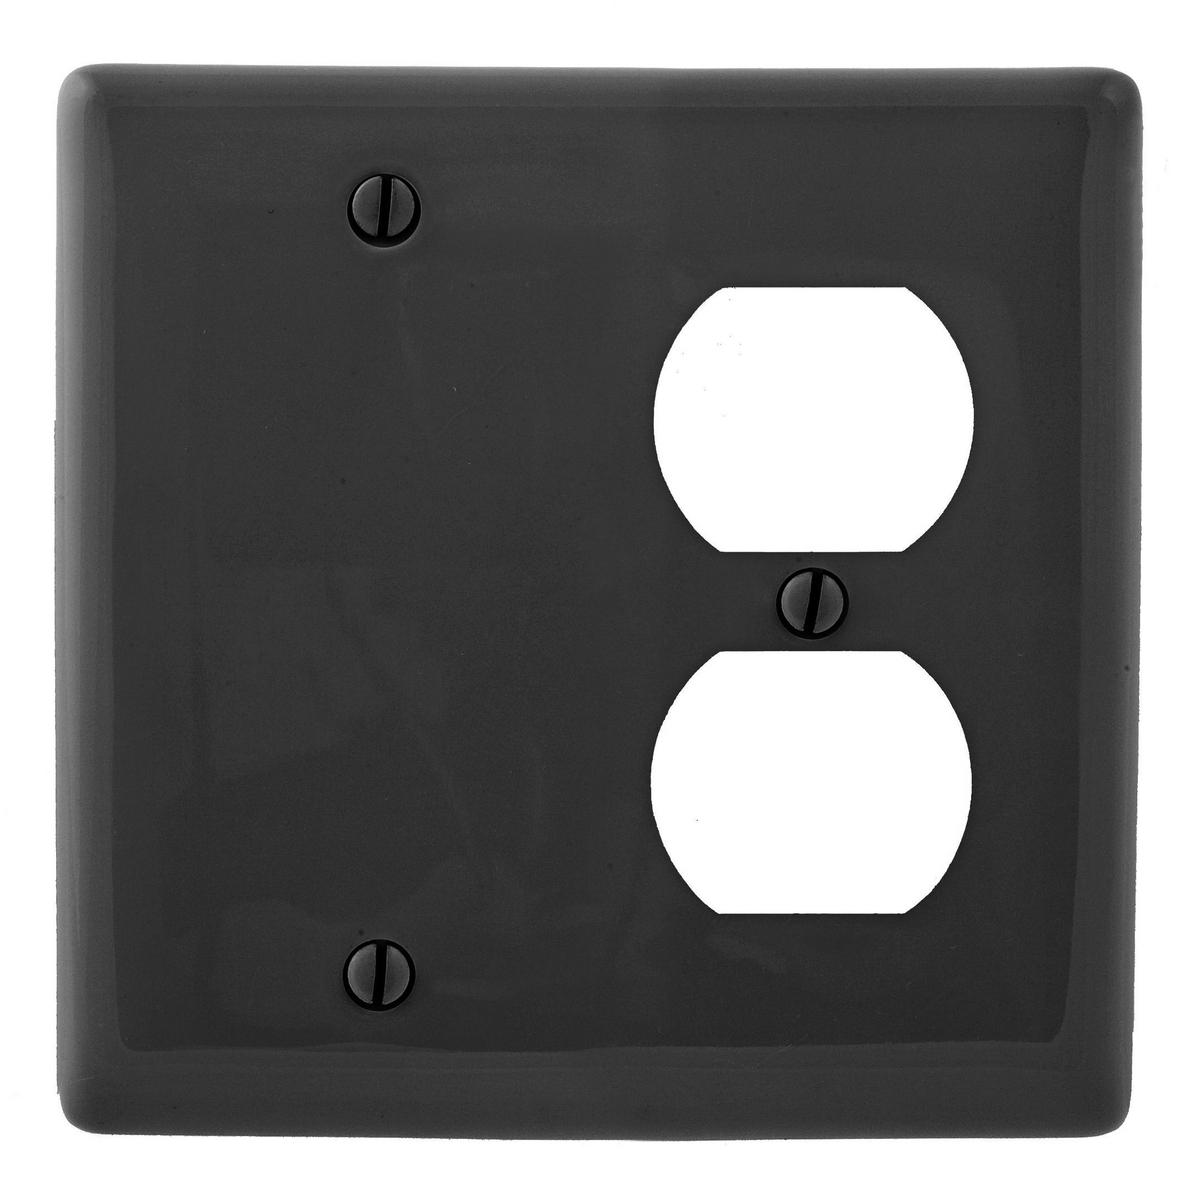 Hubbell NP138BK Wallplates, Nylon, 2-Gang, 1) Duplex, 1) Blank, Black  ; Reinforcement ribs for extra strength ; High-impact, self-extinguishing nylon material ; Captive screw feature holds mounting screw in place ; Standard Size is 1/8" larger to give you extra coverage